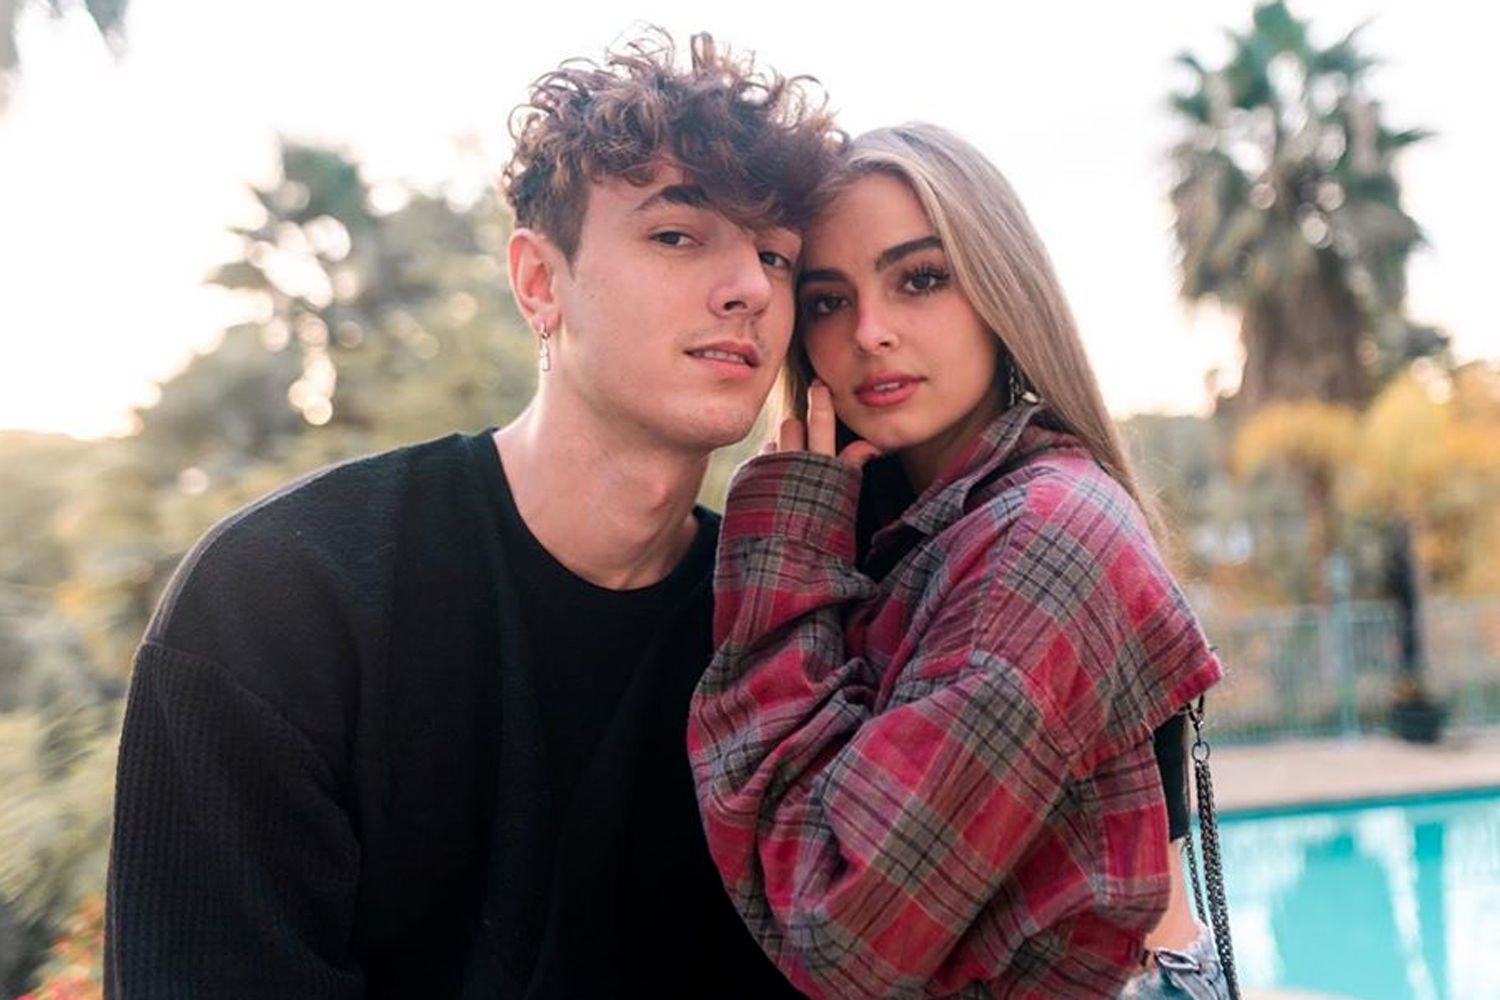 Addison Rae and Bryce Hall Have Broken Up